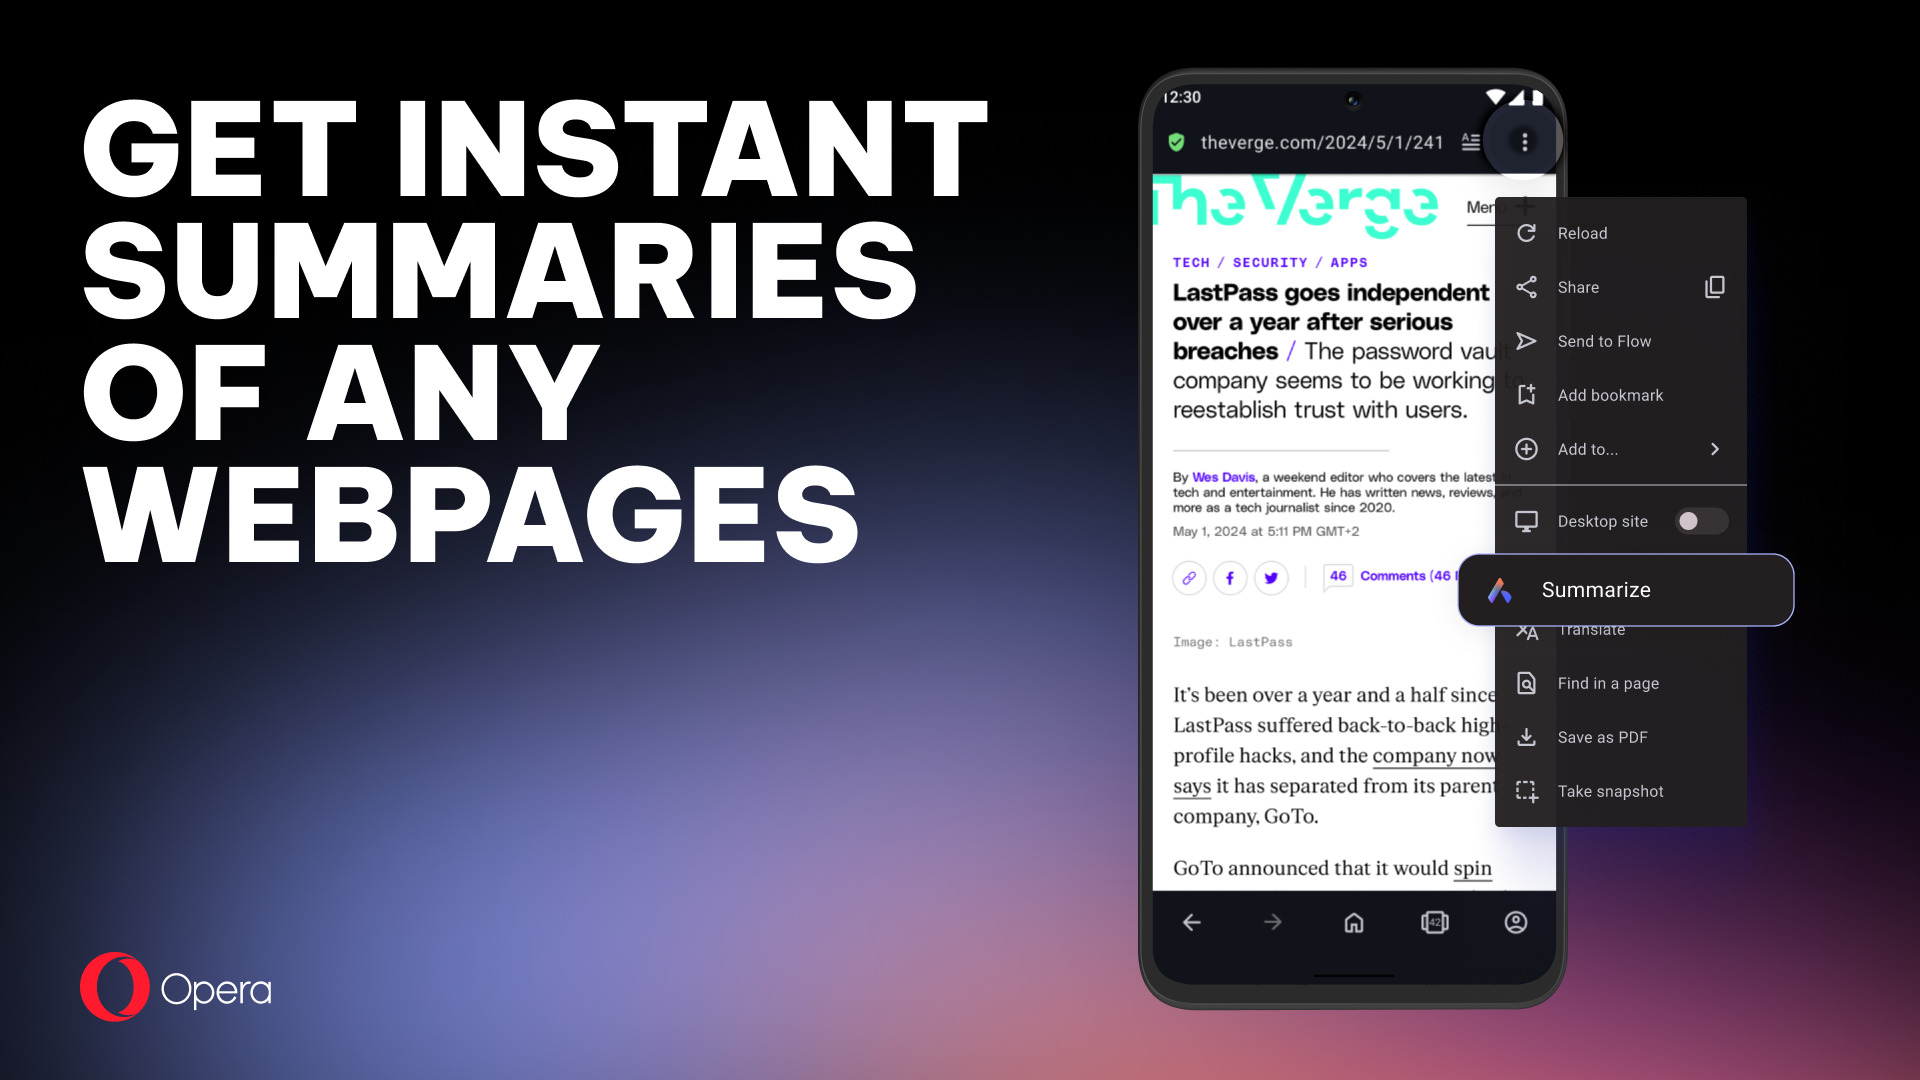 Aria can now Summarize text-based webpages in Opera for Android version 82. Get instant summaries for any webpages!